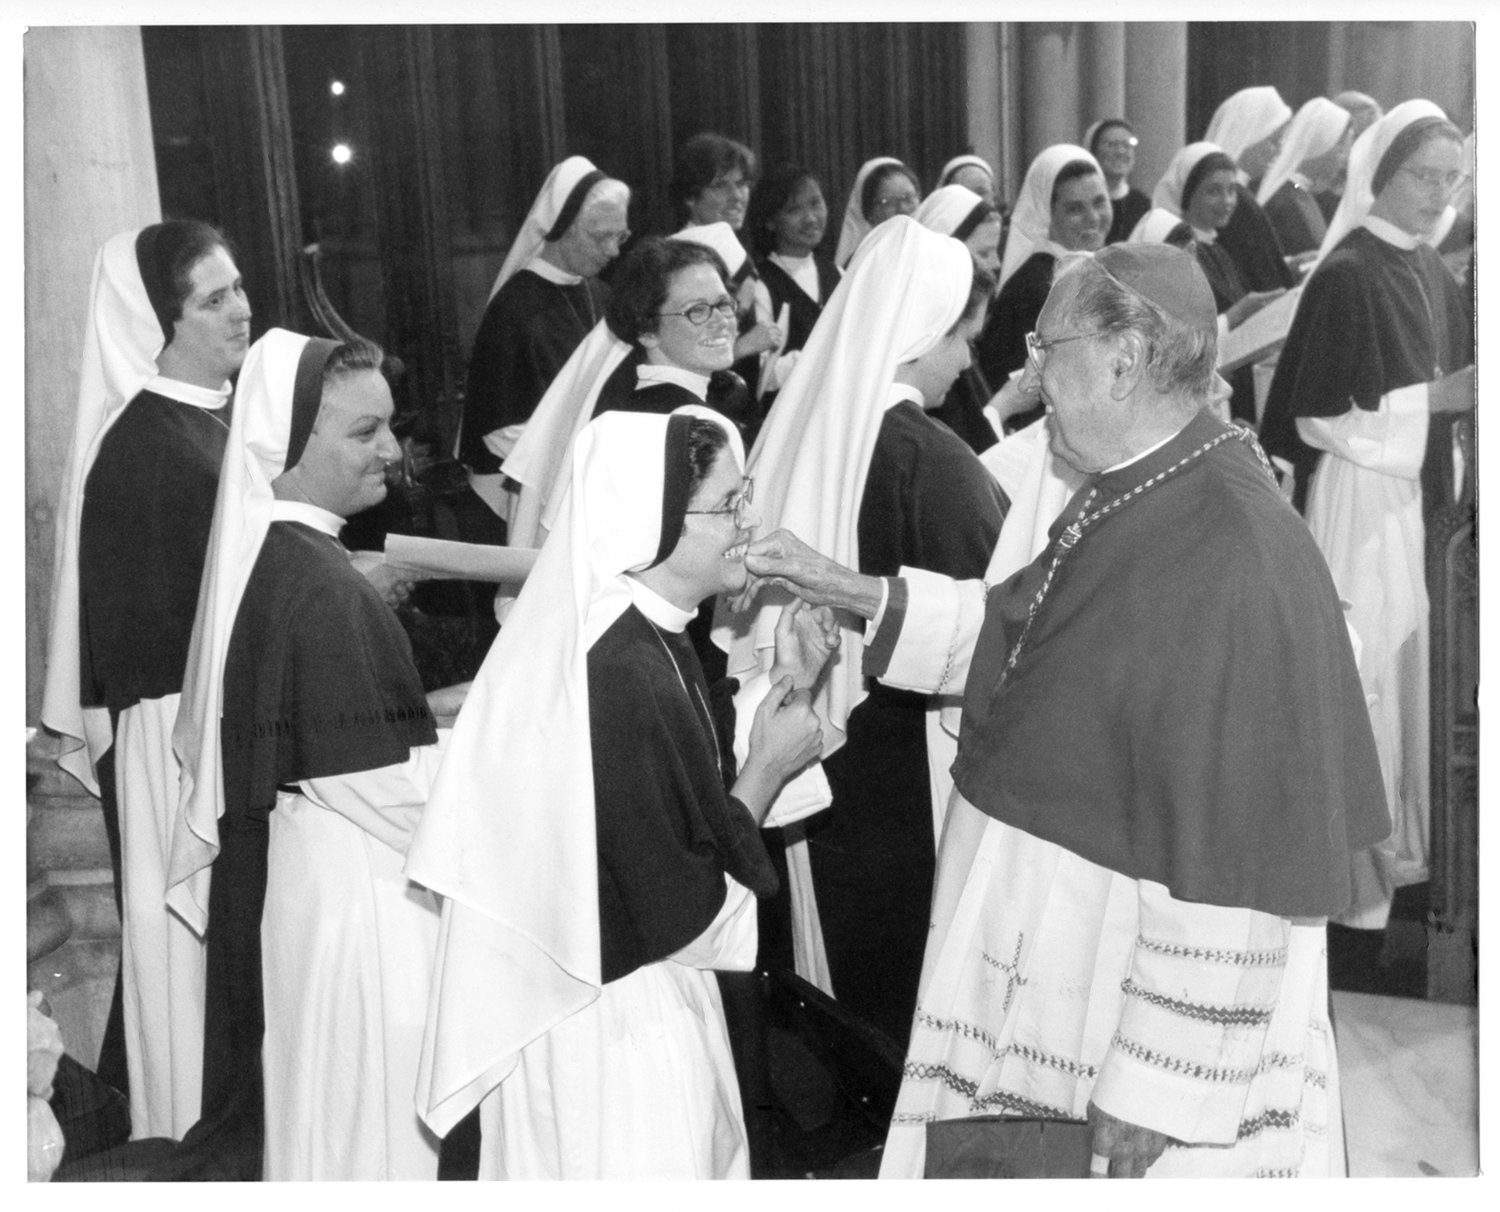 IN PERSON AND PRINT—Cardinal John O’Connor, above, greets jubilant Sisters of Life at St. Patrick’s Cathedral in September 1999. At left is the cardinal’s Nov. 2, 1989 From My Viewpoint column in Catholic New York in which the cardinal called for the foundation of the Sisters of Life.